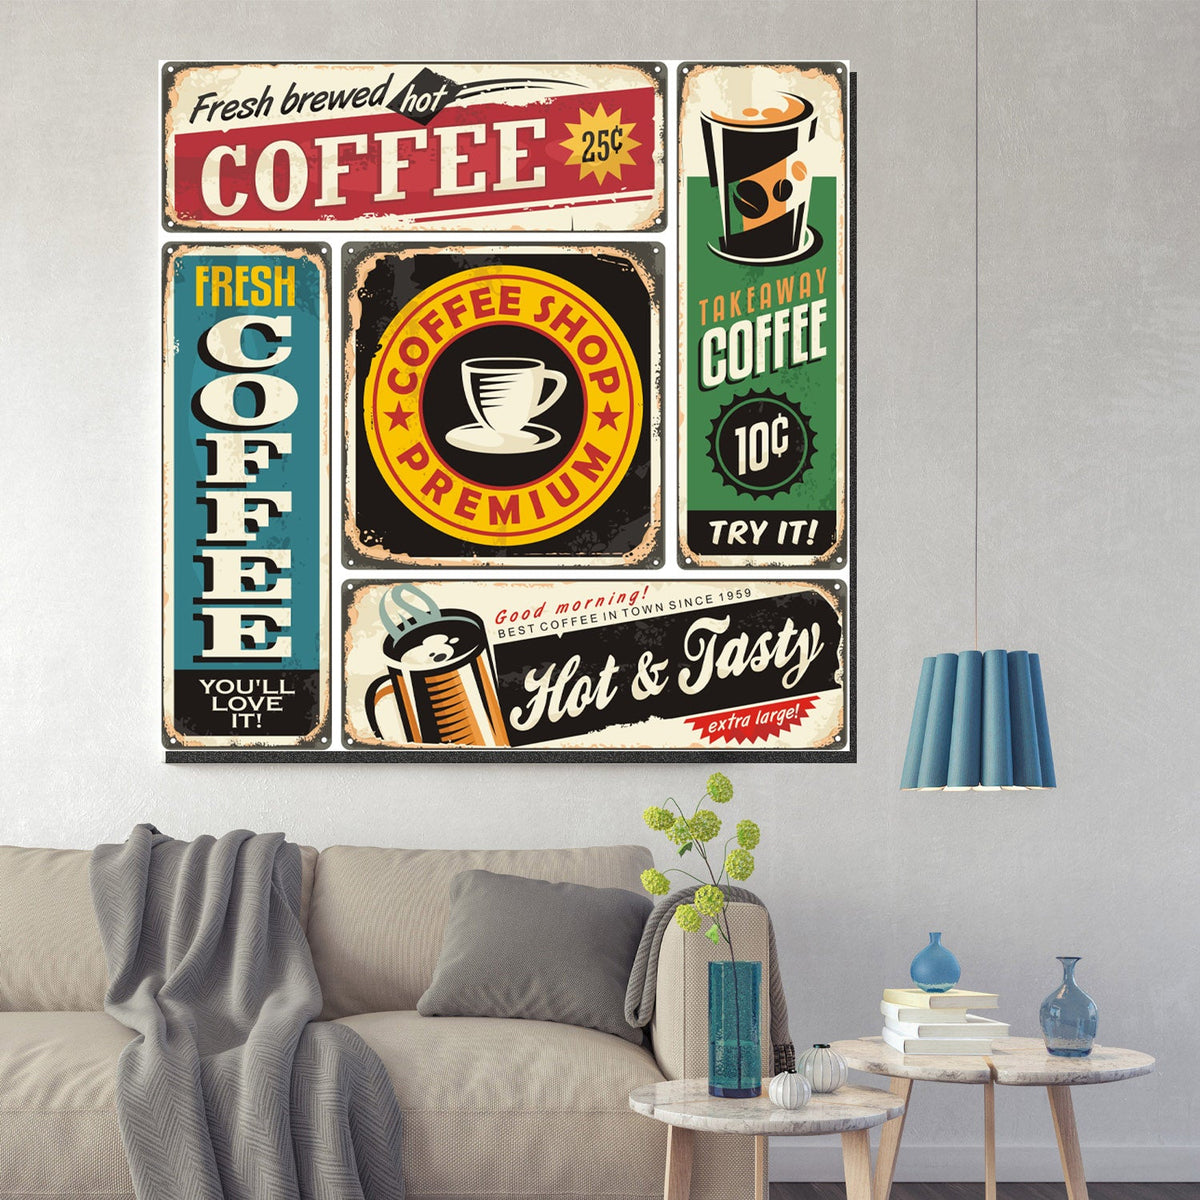 https://cdn.shopify.com/s/files/1/0387/9986/8044/products/MetalCoffeeSignCanvasArtprintStretched-2.jpg